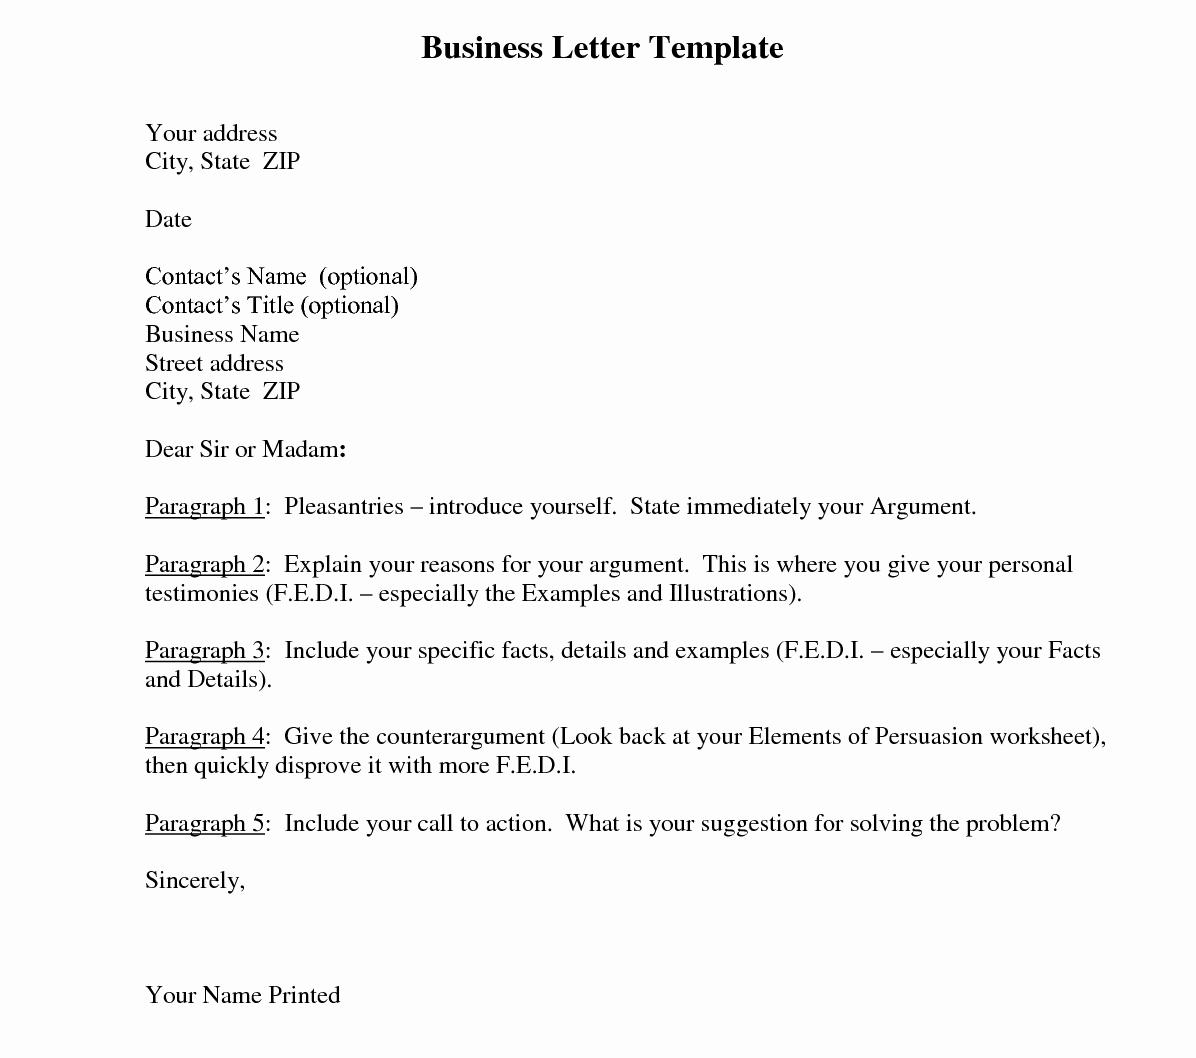 Business Letter Template and their Benefits